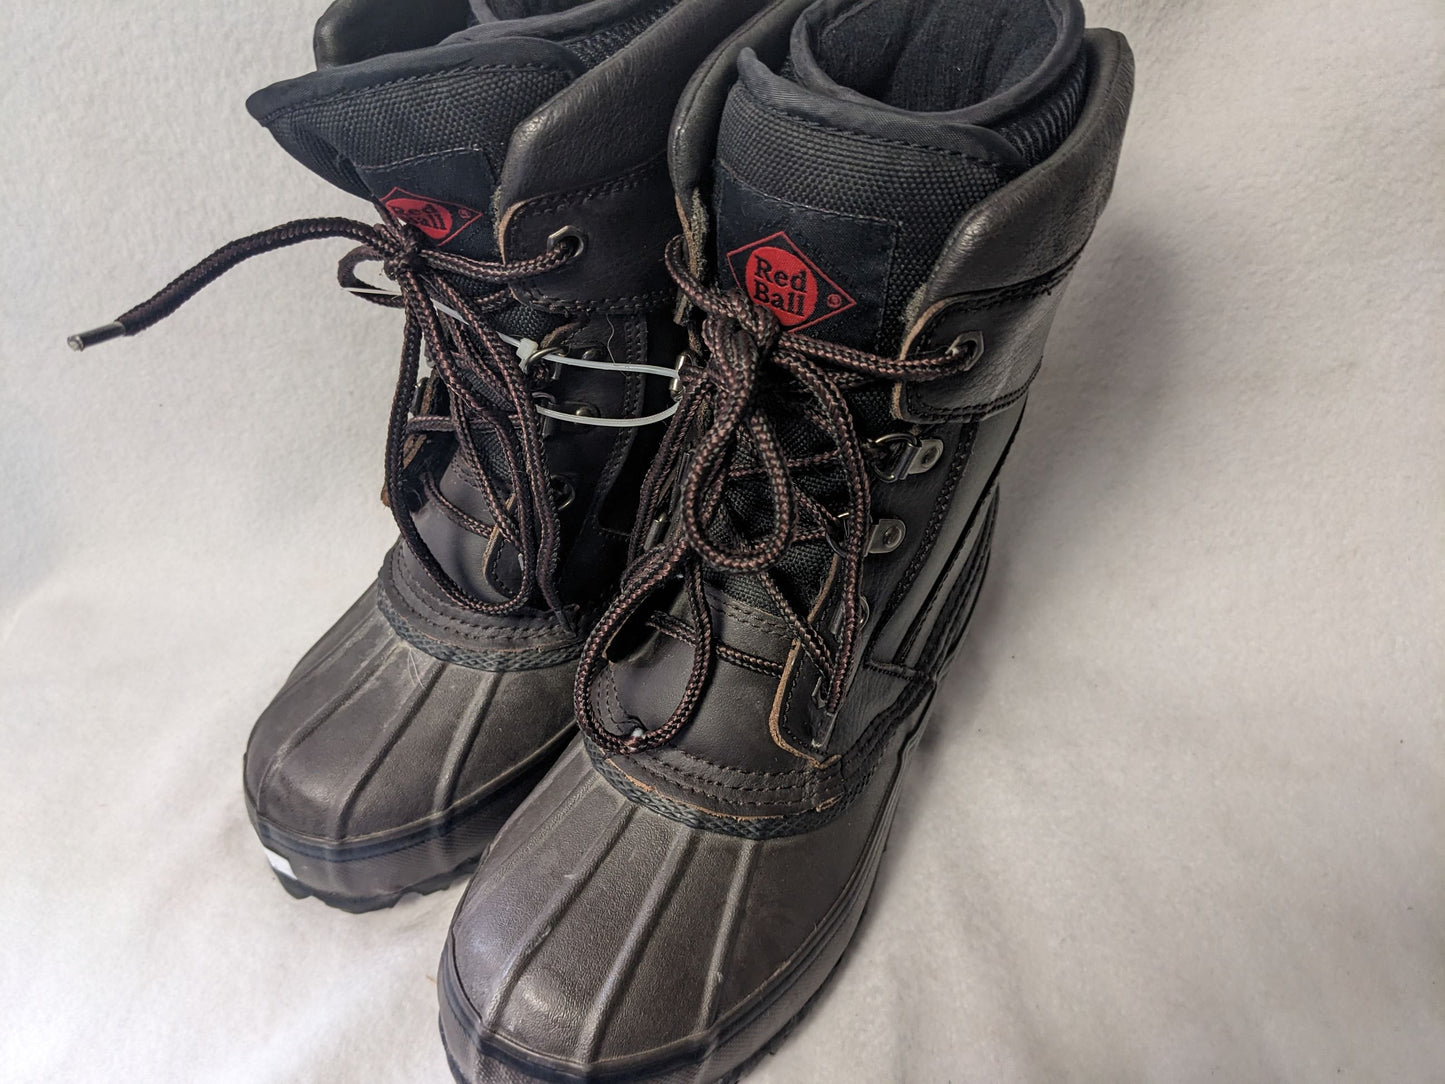 Red Ball Youth Insulated Hiking Boots Size 4 Color Black Conditon Used